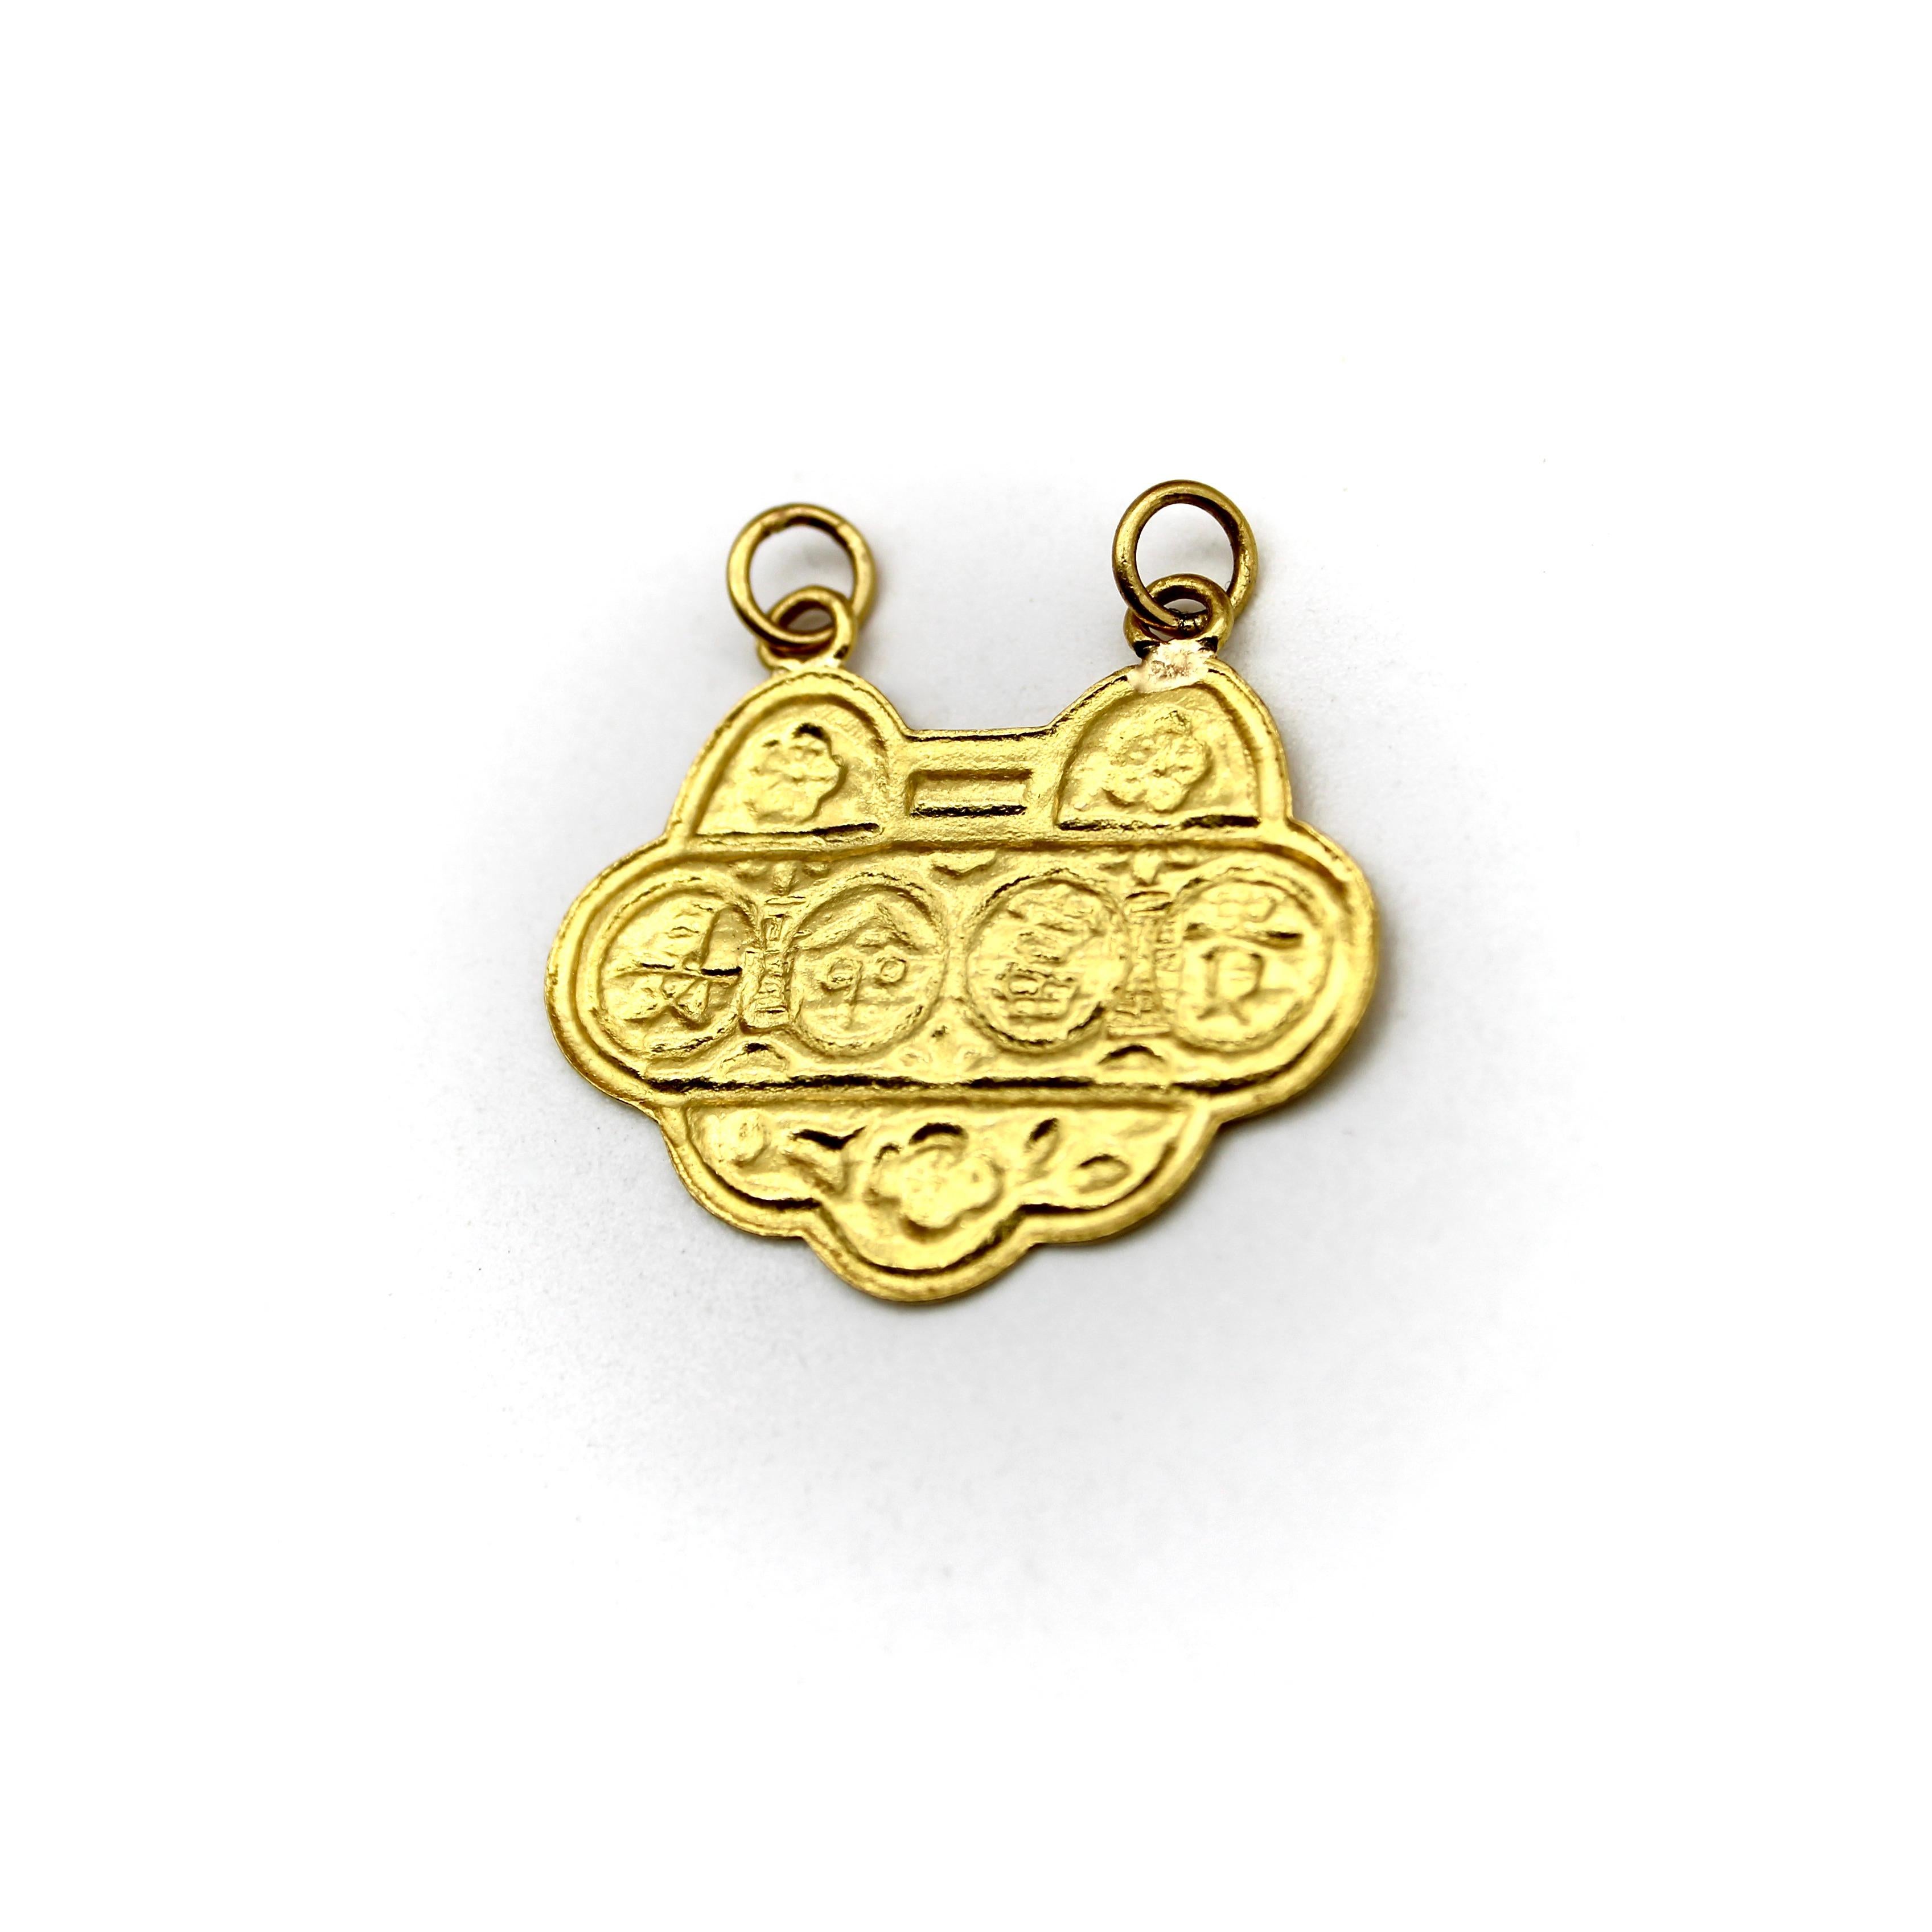 Traditionally given to newborn babies, “Blessing Locks” are gold pendants believed to bring luck, love, and success to the child’s future. They contain Chinese symbols for good fortune and protection, and are typically shaped in a form reminiscent